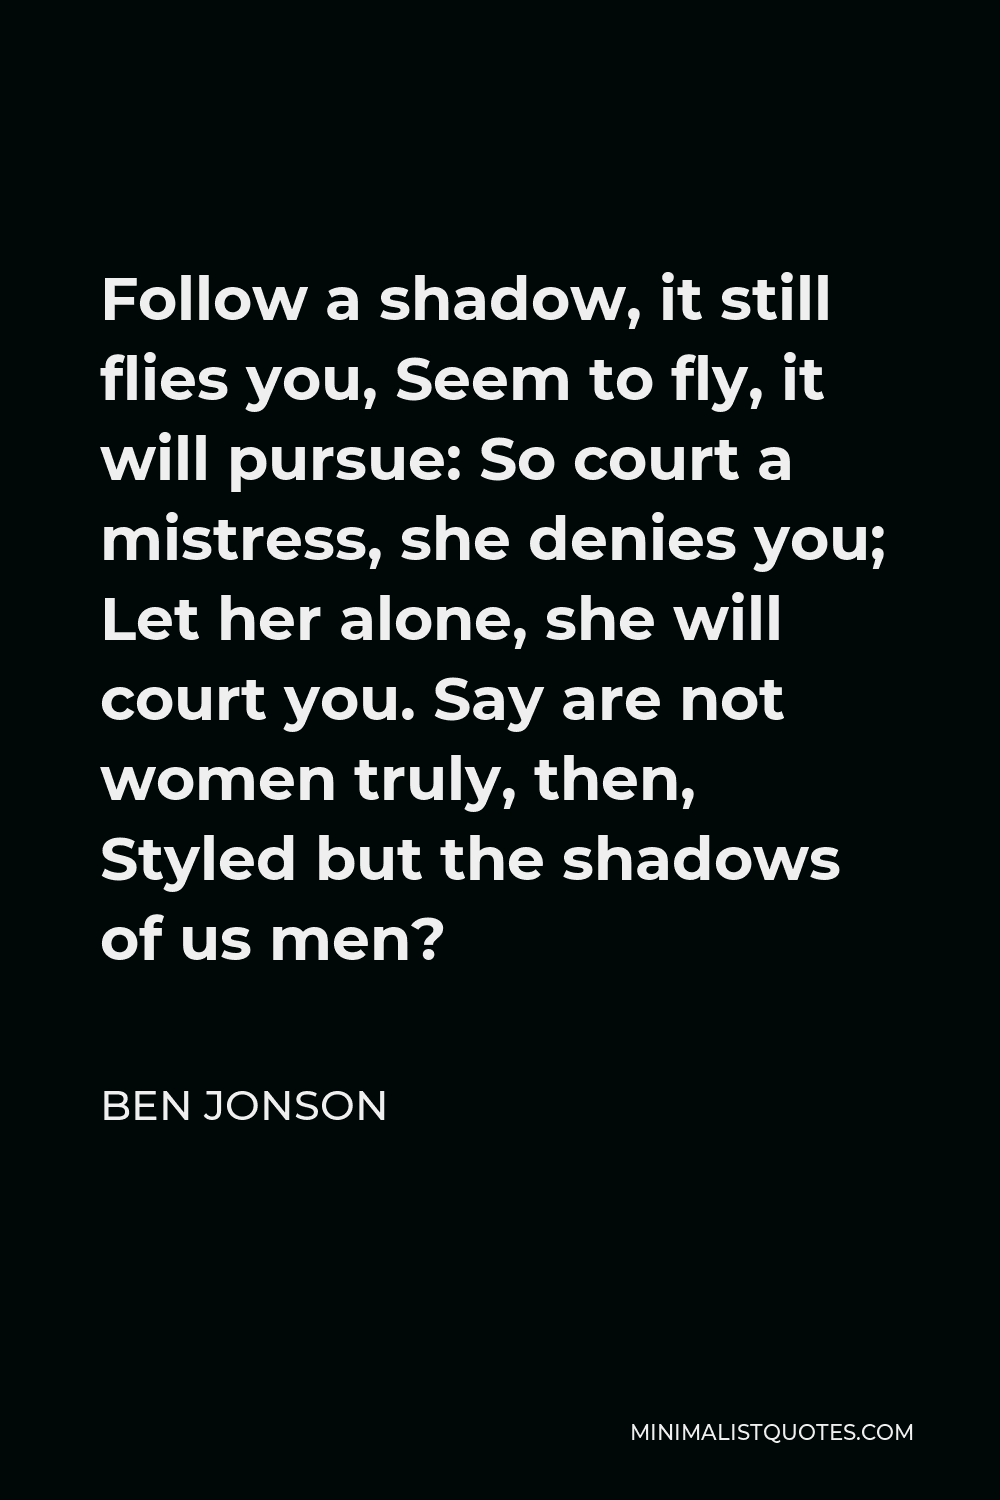 Ben Jonson Quote - Follow a shadow, it still flies you, Seem to fly, it will pursue: So court a mistress, she denies you; Let her alone, she will court you. Say are not women truly, then, Styled but the shadows of us men?